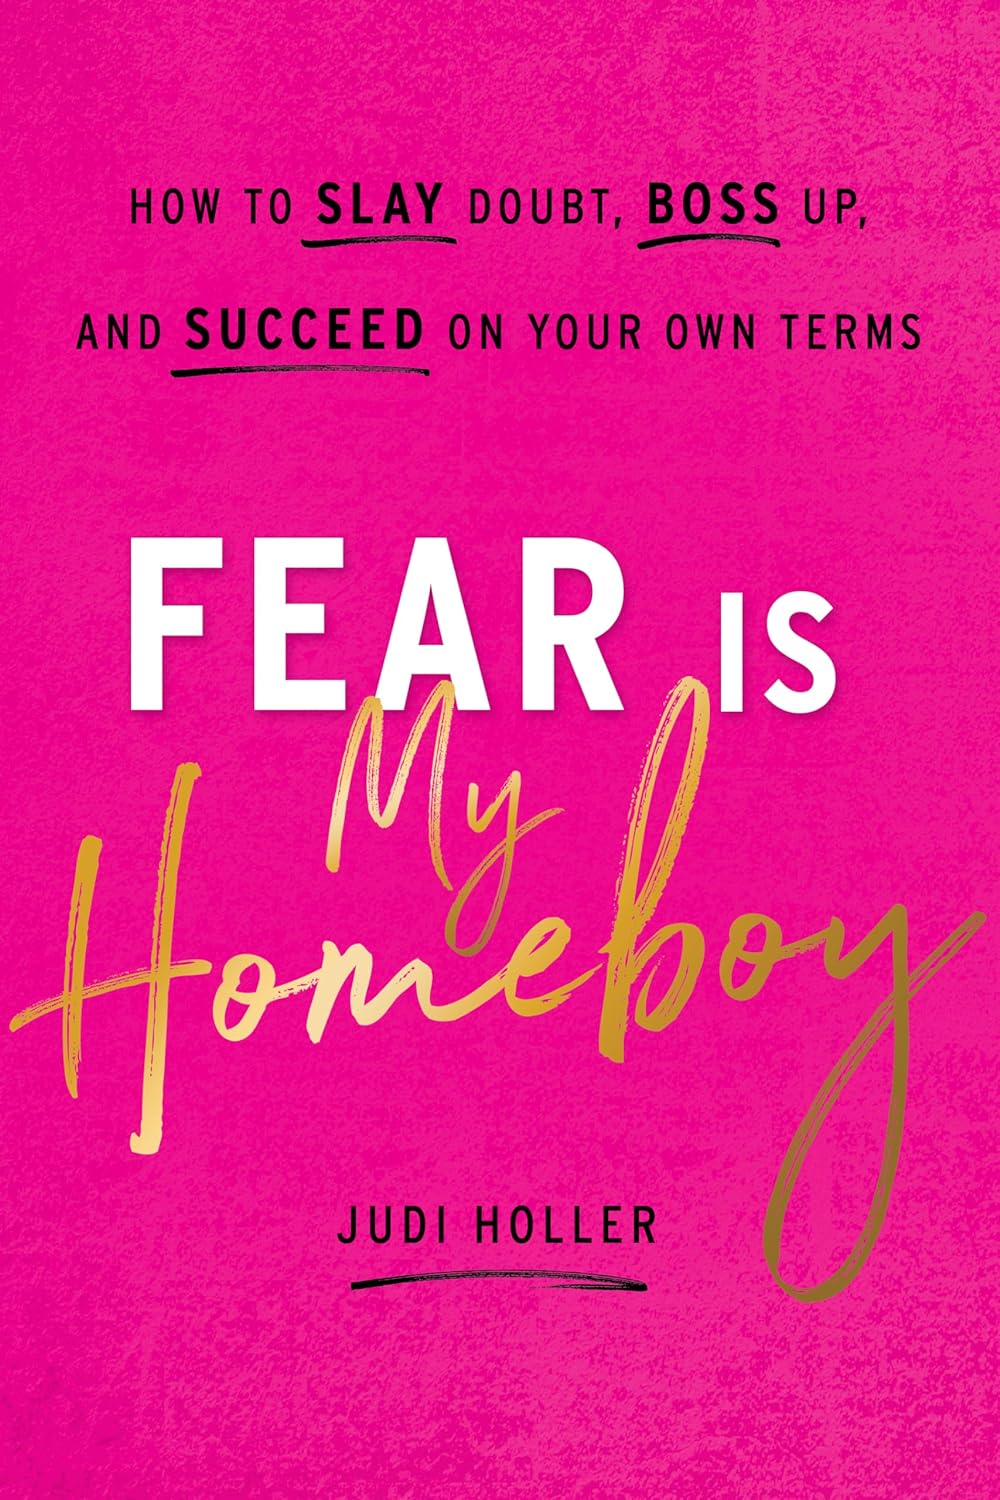 Judi Holler - Fear Is My Homeboy. How to Slay Doubt, Boss Up, and Succeed on Your Own Terms